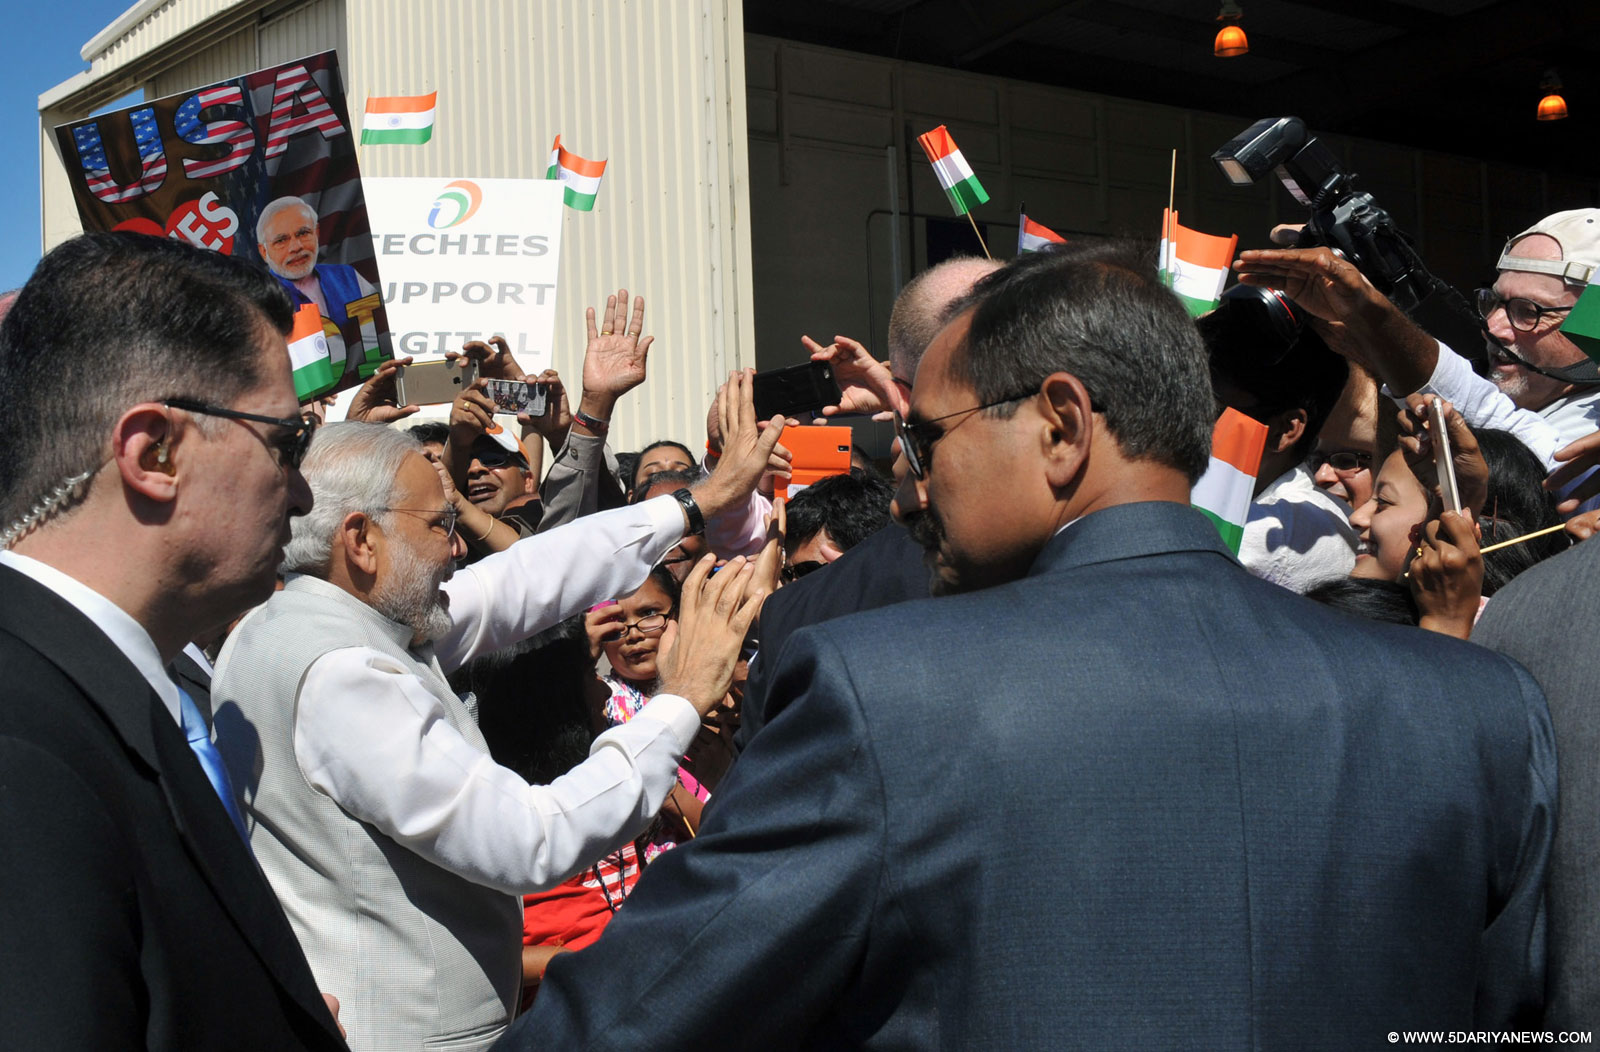 The Prime Minister, Shri Narendra Modi being received by the public at the San Jose Airport on September 26, 2015.